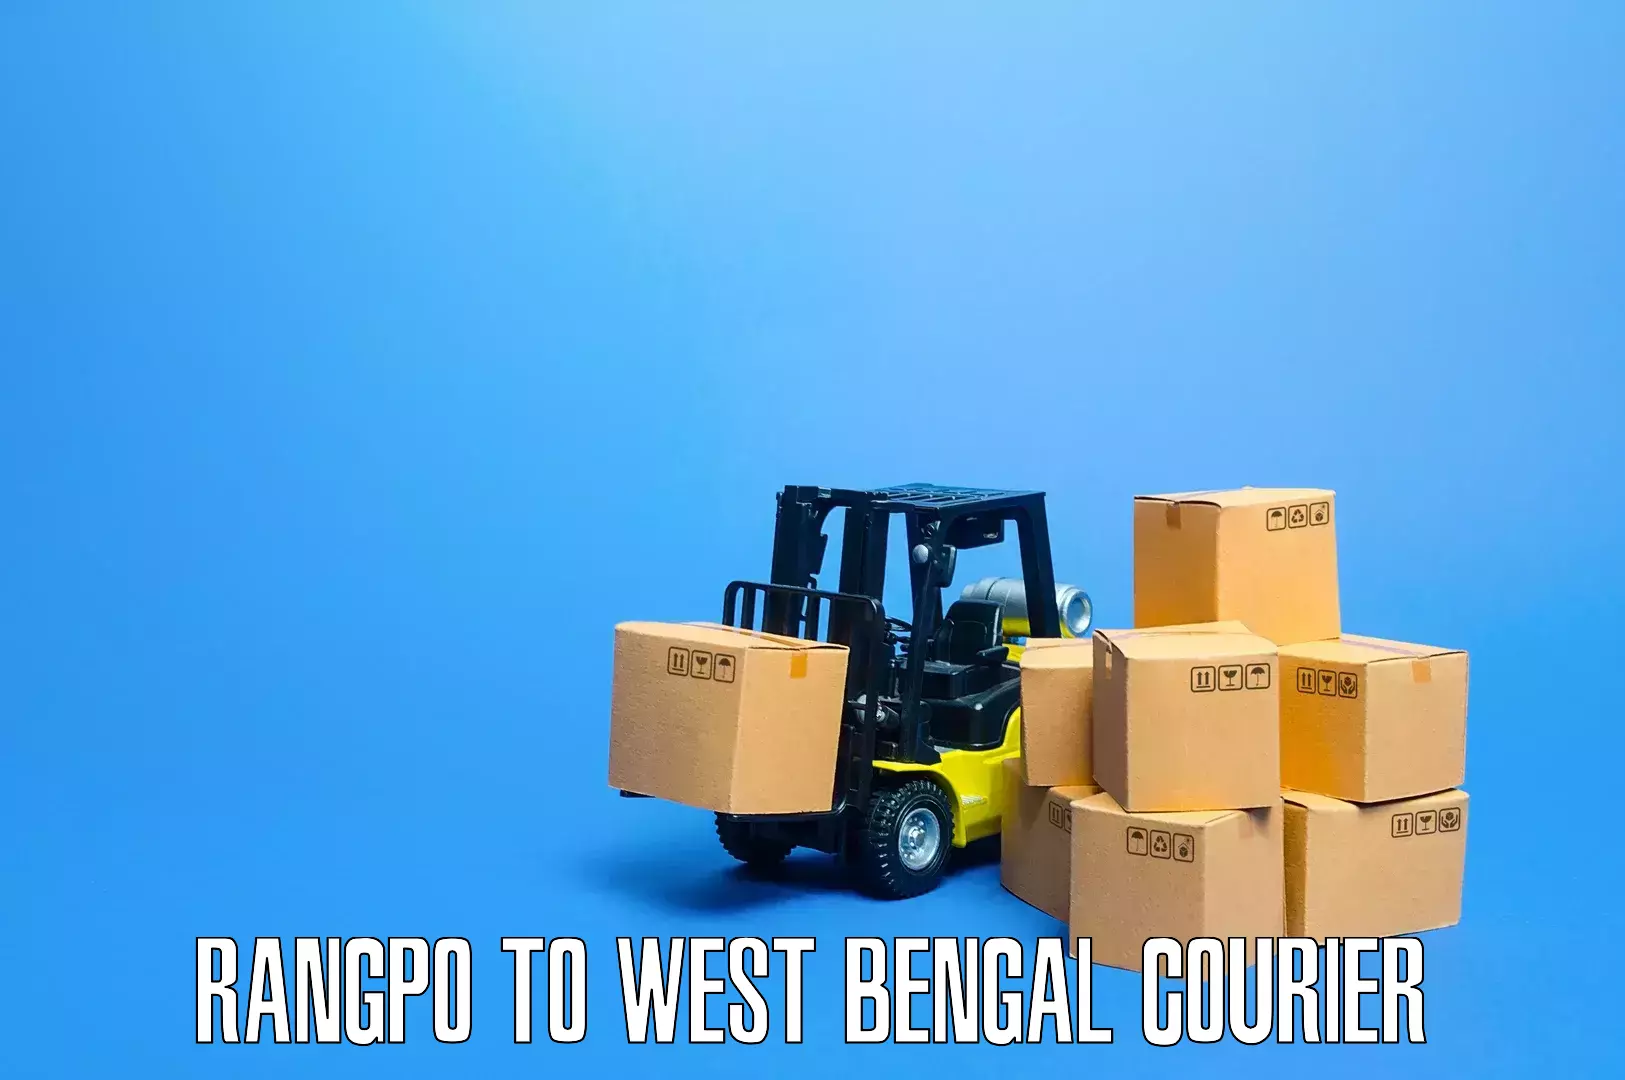 Furniture transport service Rangpo to West Bengal